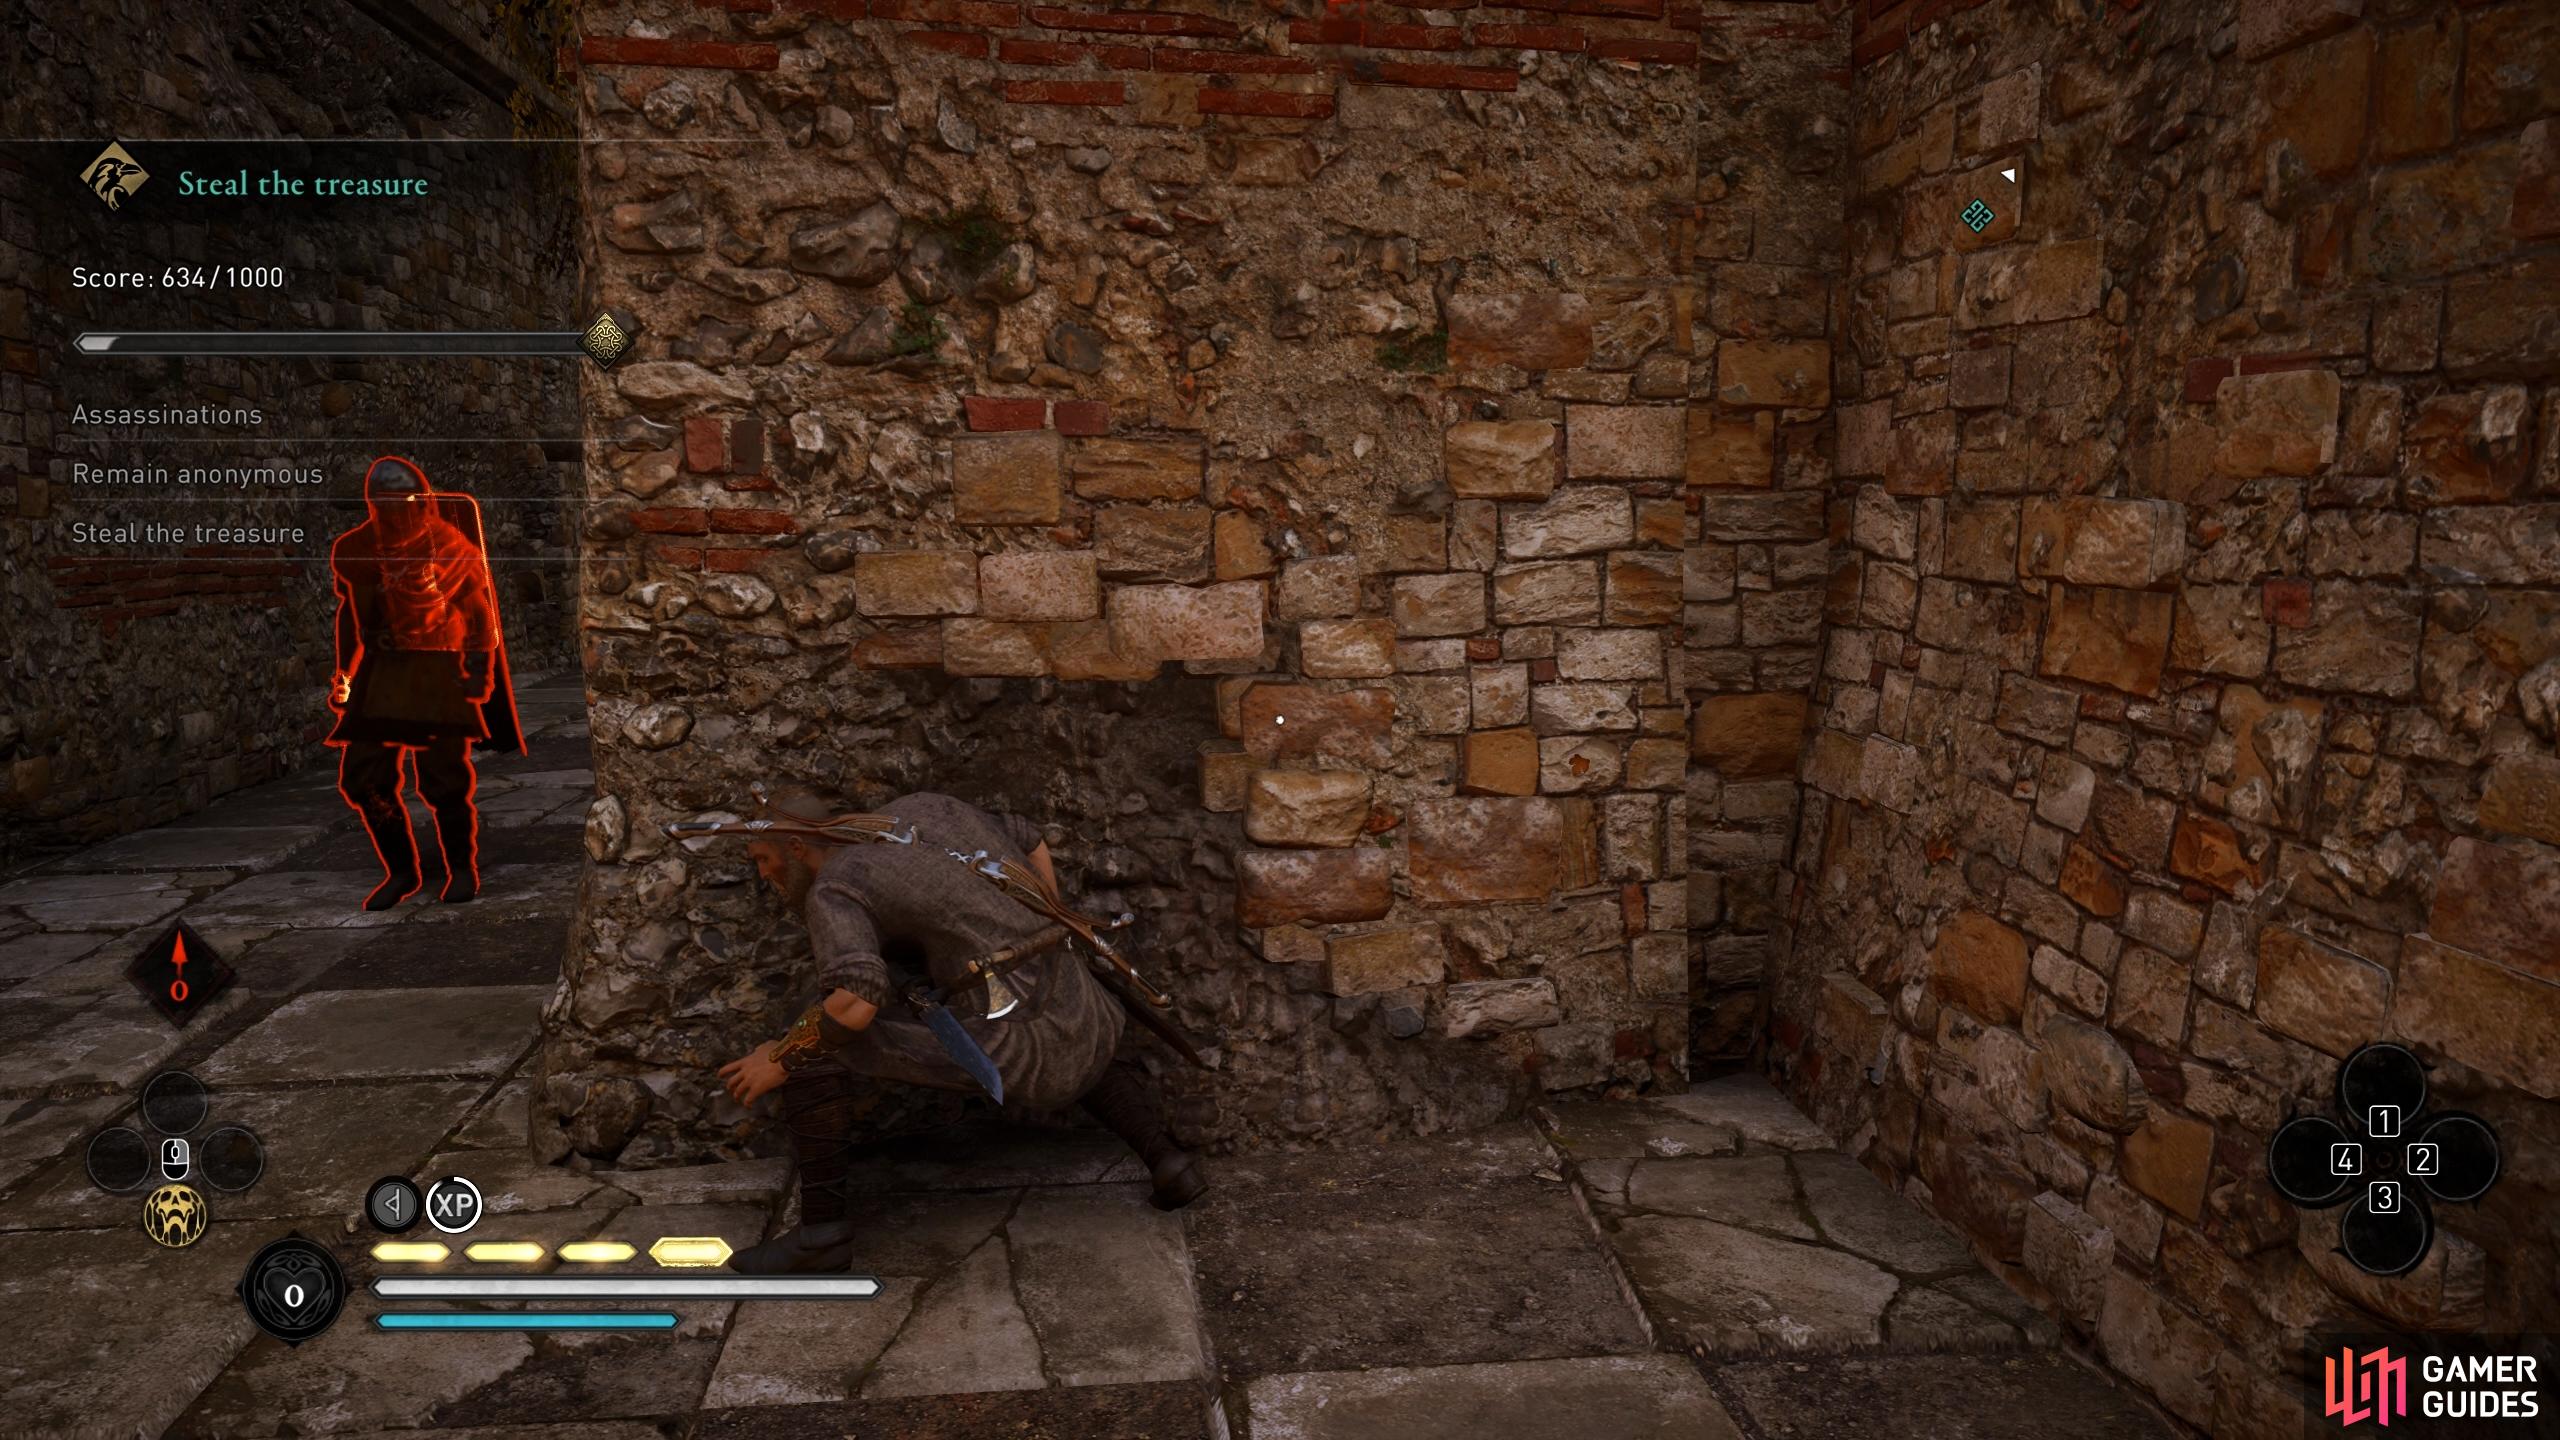 Wait for the patrol to arrive near where you performed the ledge assassination, then take them out as they draw near.